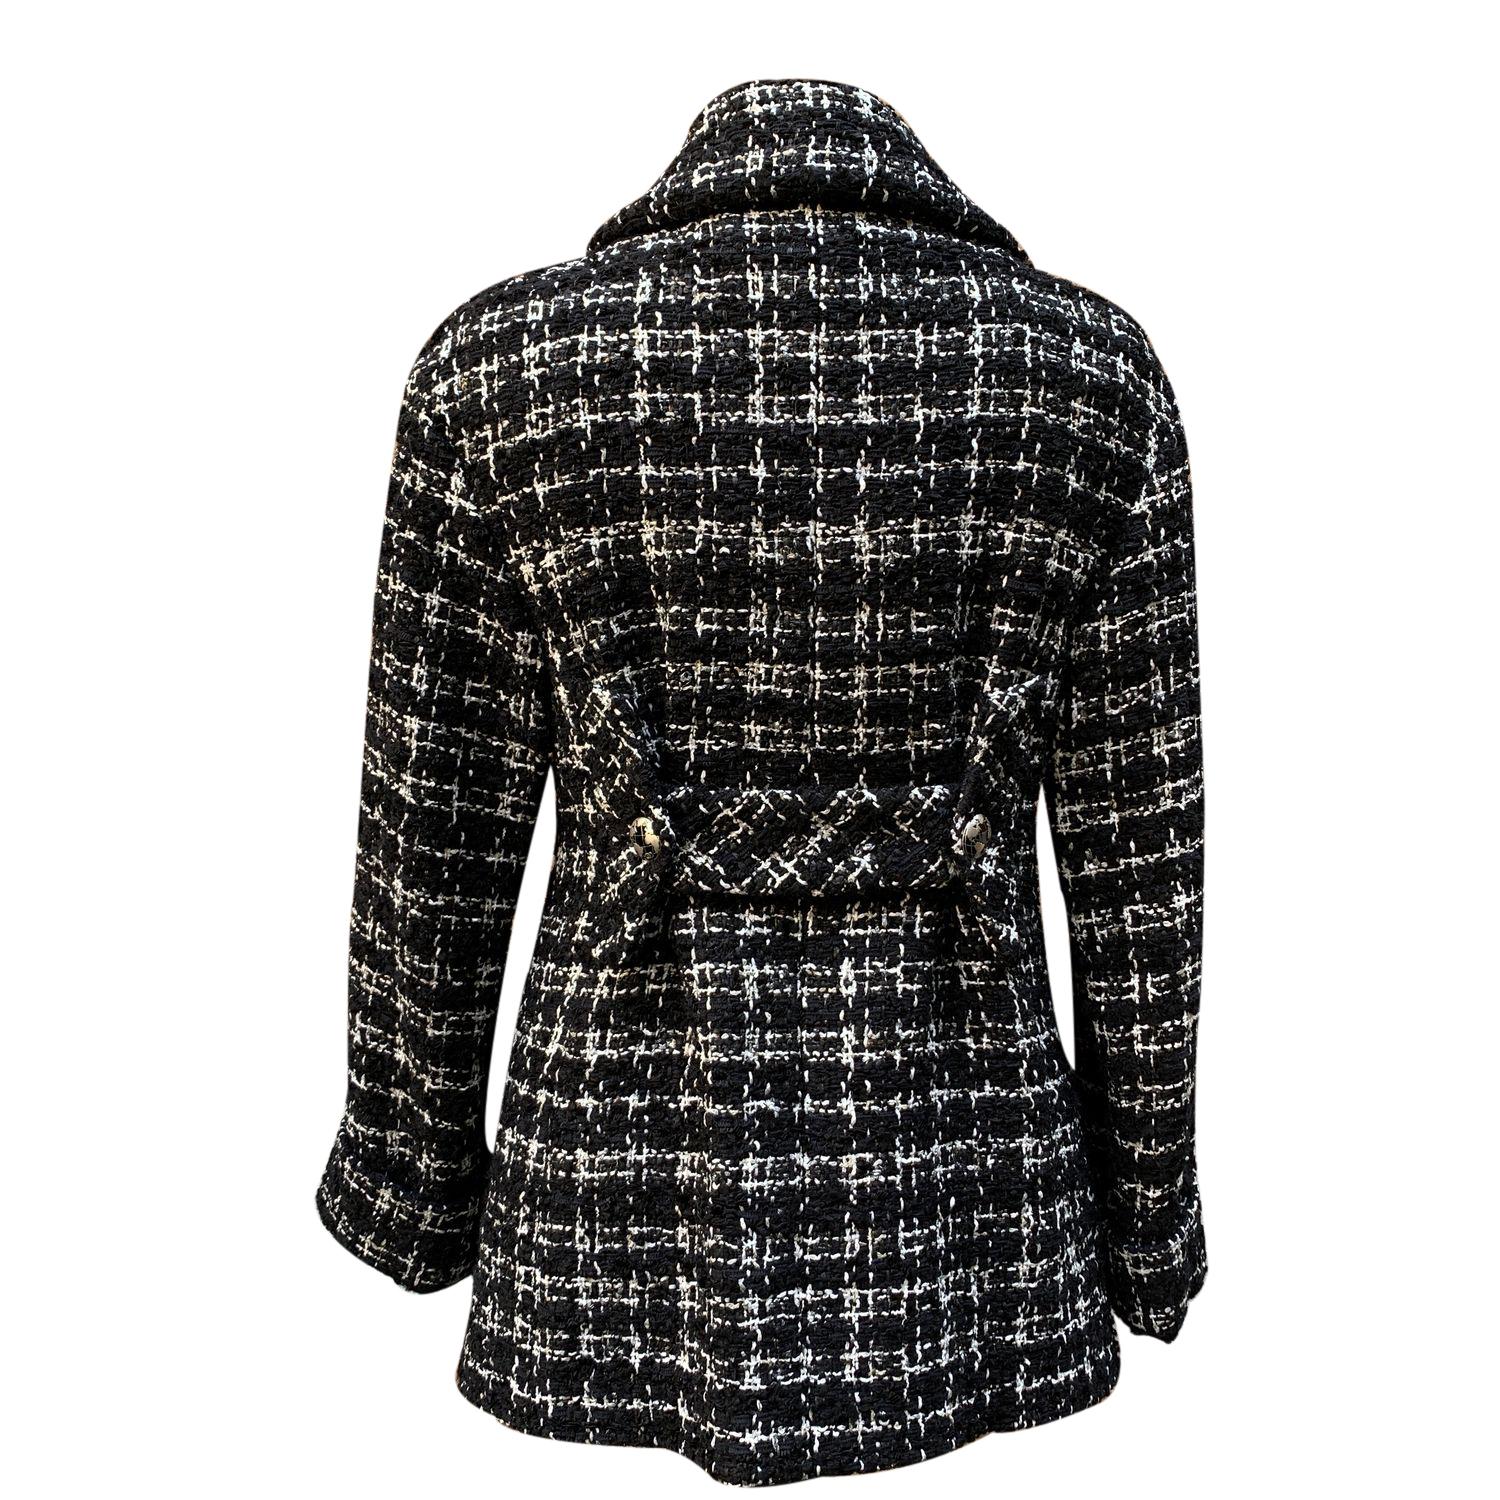 Chanel Black and White Tweed Planisphere Jacket Size 38 FR In Excellent Condition For Sale In Rome, Rome